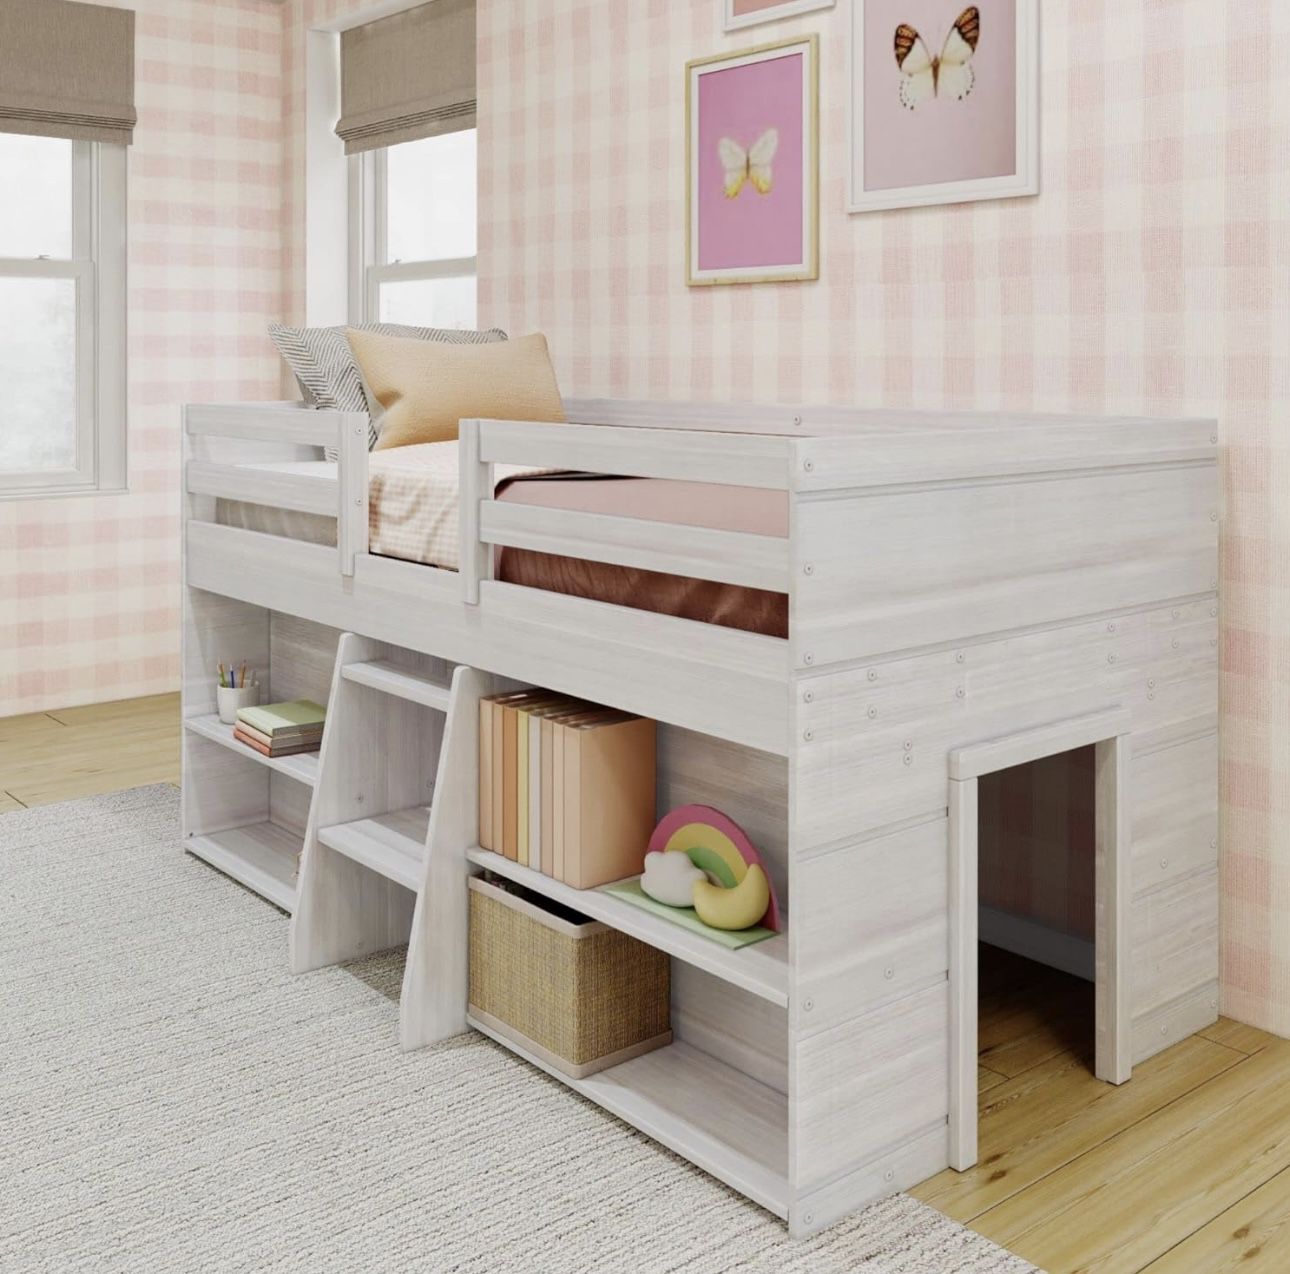 Max & Lily Modern Farmhouse Low Loft Bed, Twin Bed Frame for Kids with 2 Bookcases, White Wash